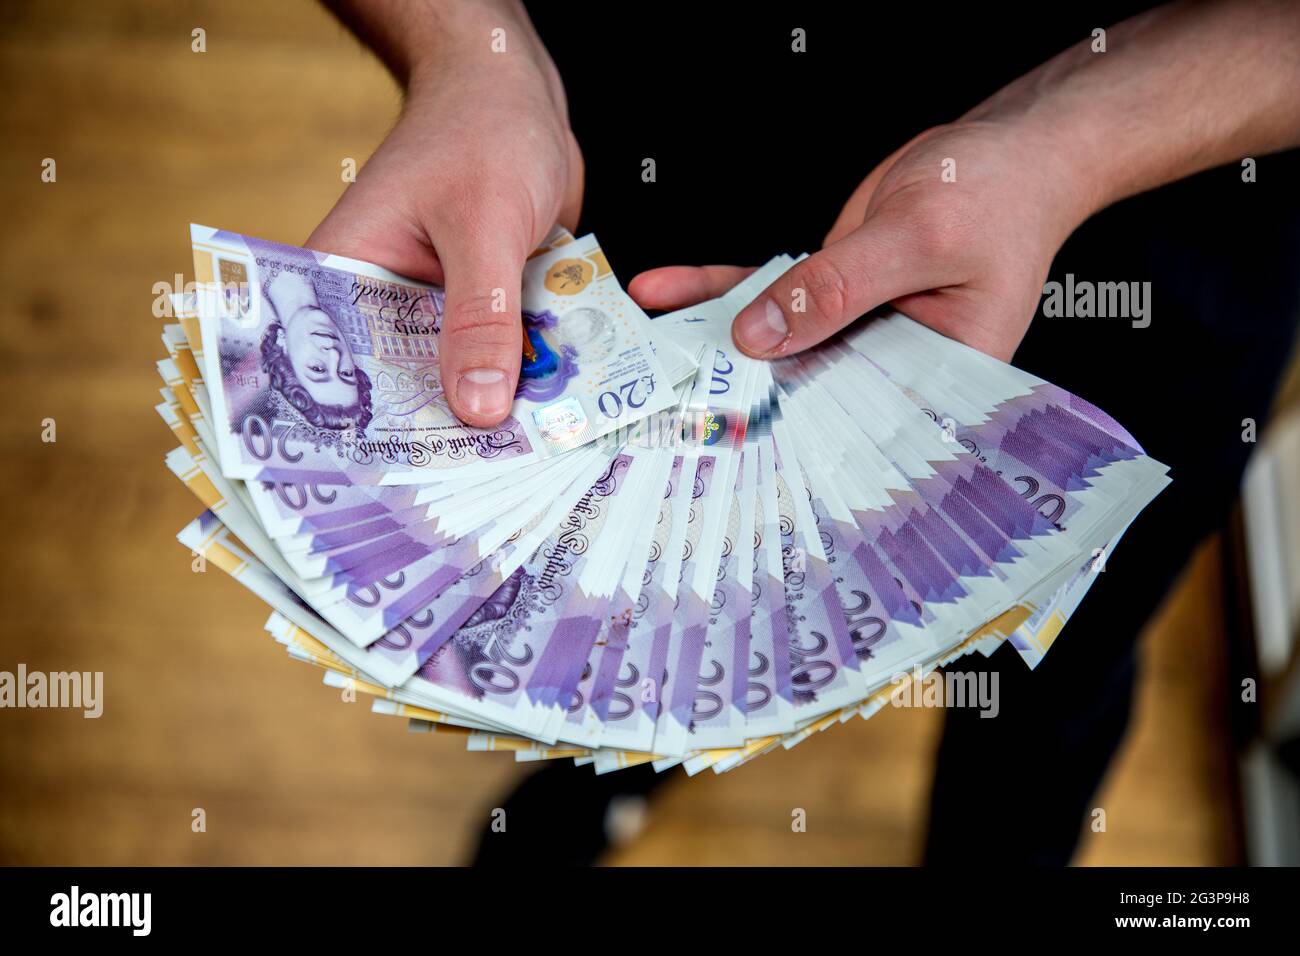 Wad of dosh, pound sterling. Stock Photo